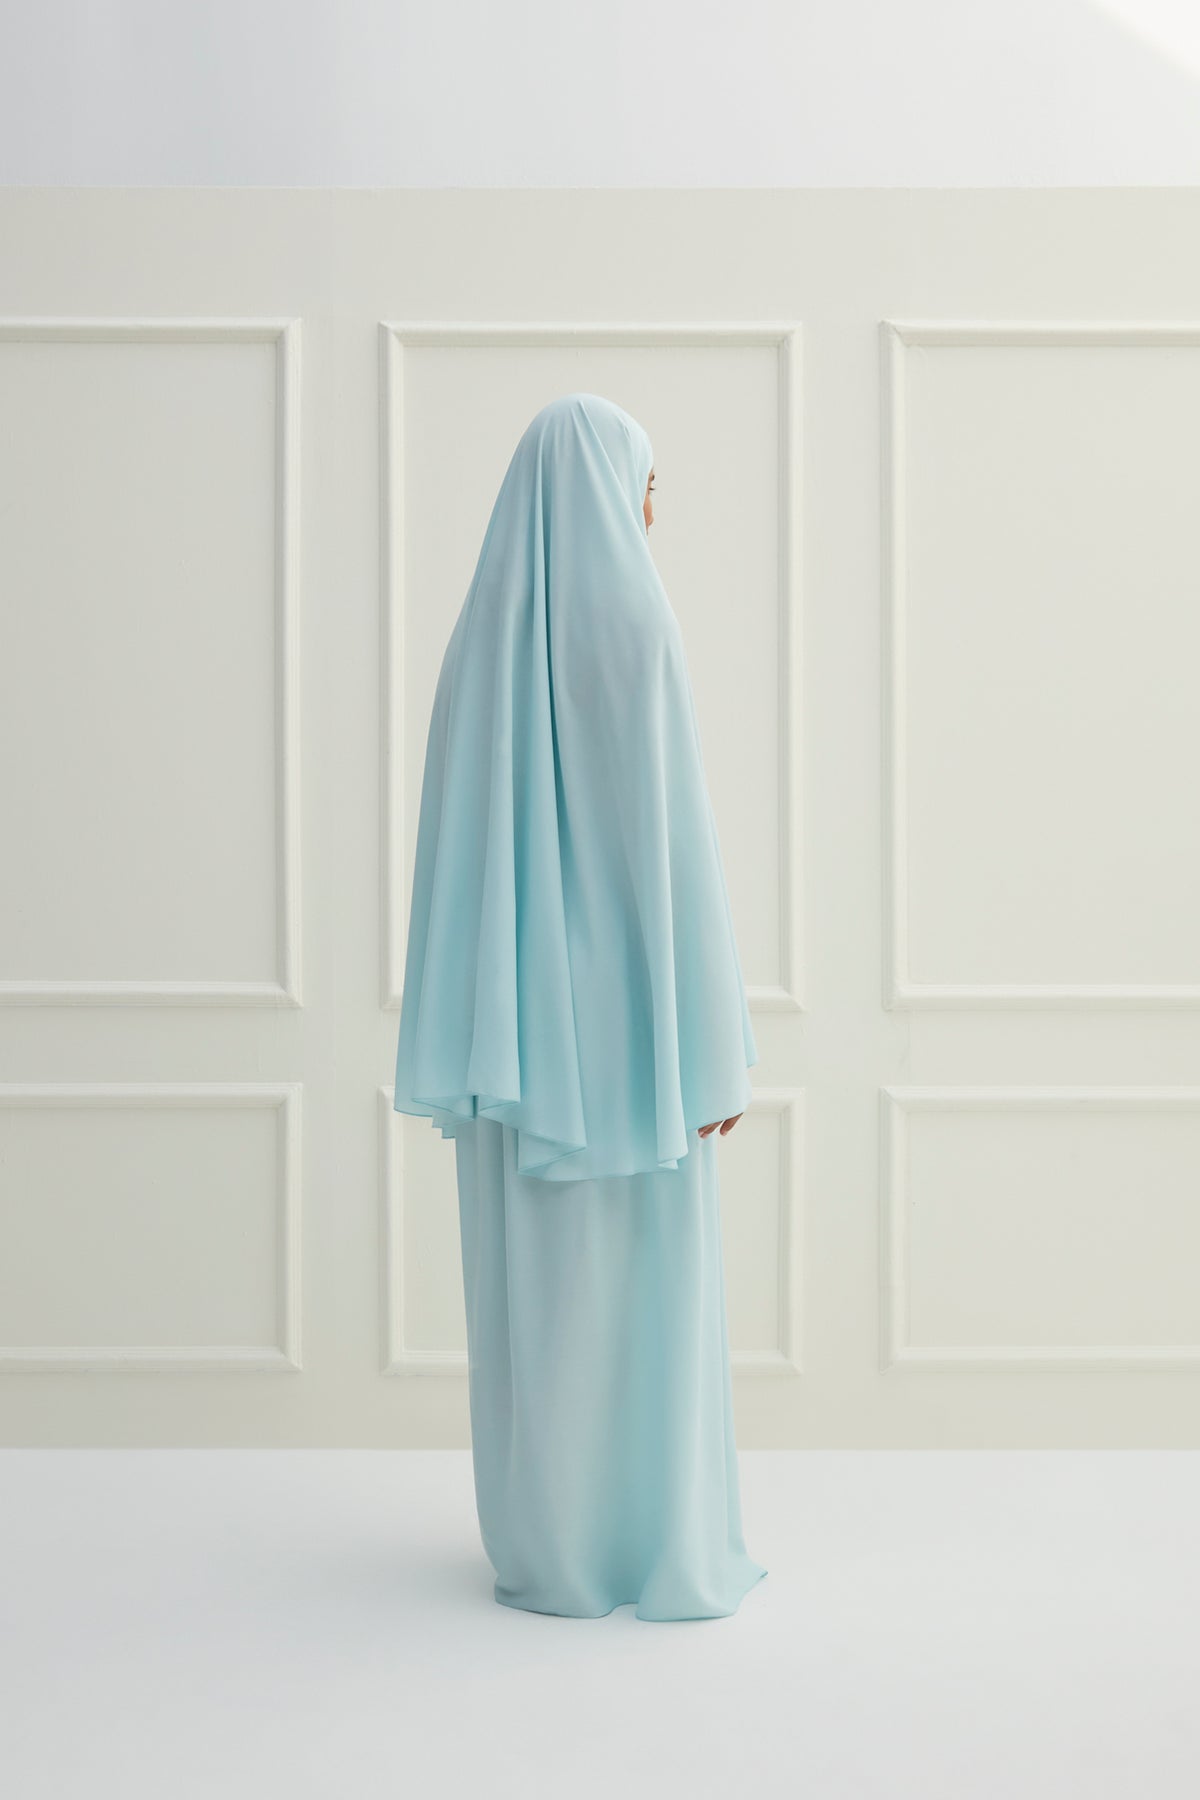 Two Piece ( skirt & top cover) Prayer Clothes